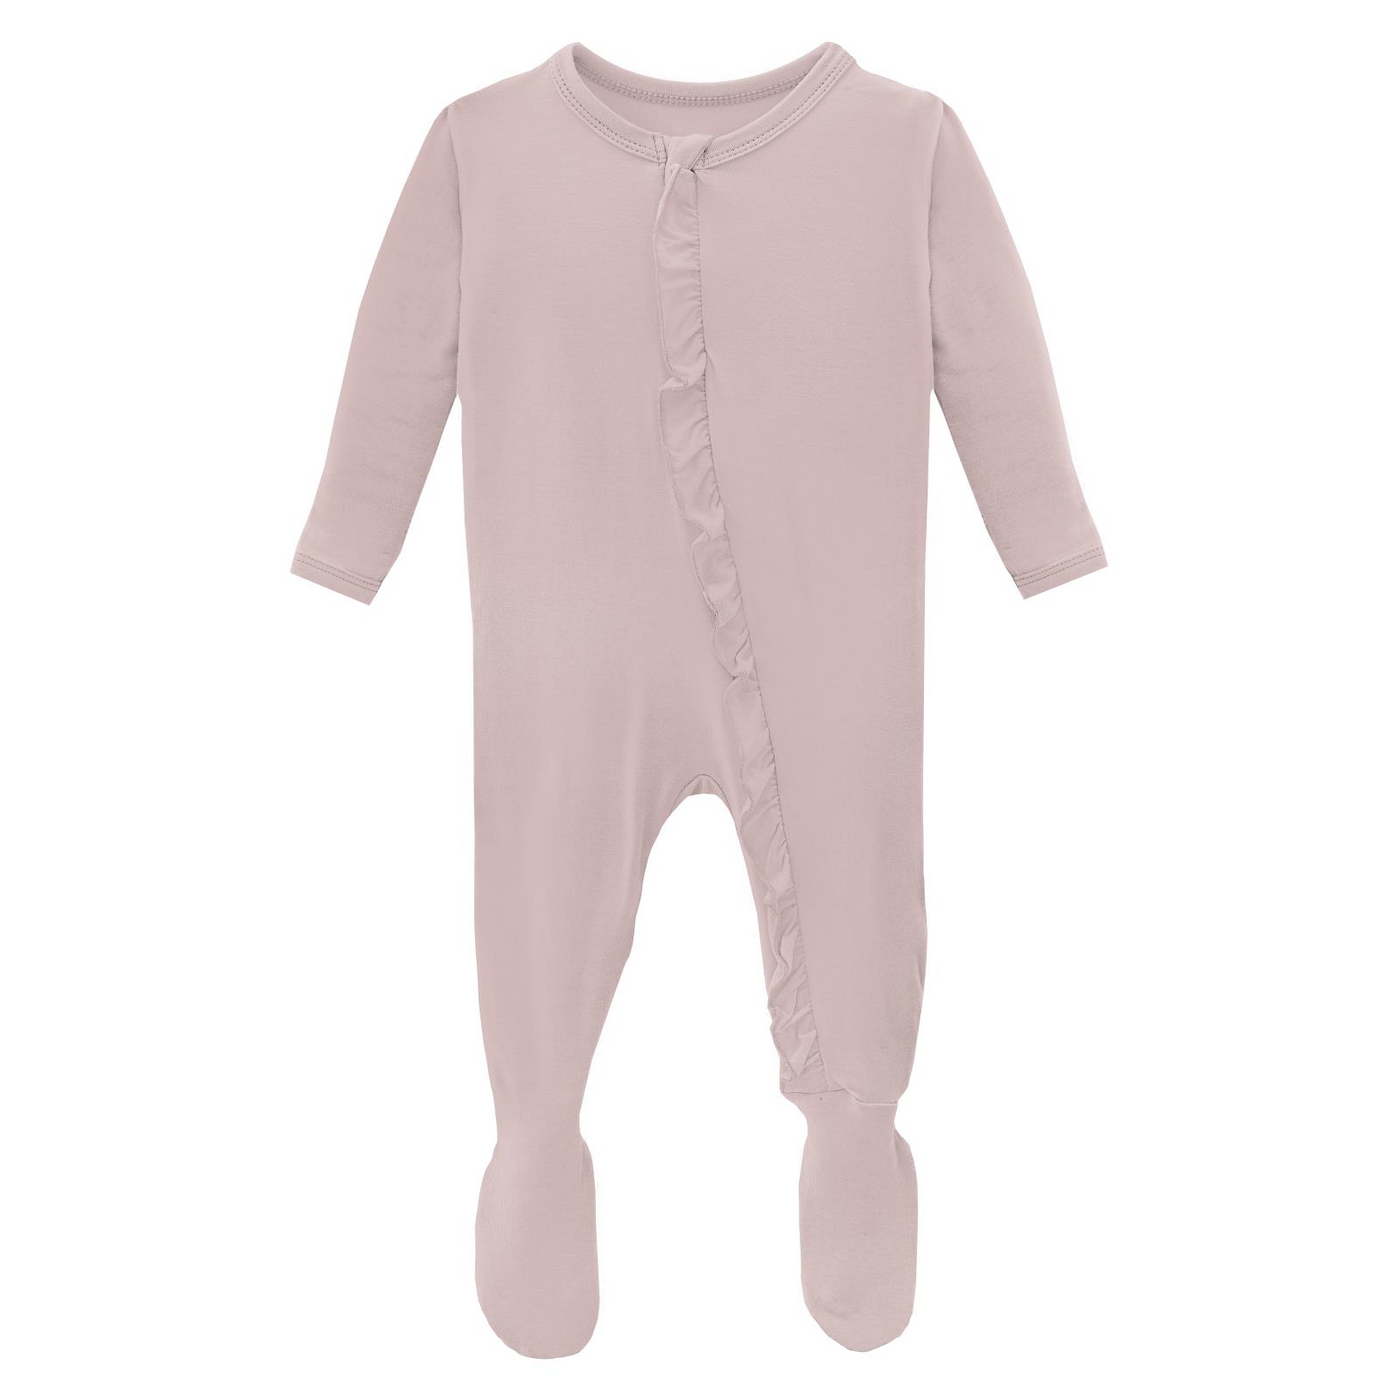 Kickee Pants Classic Ruffle Footie with 2 Way Zipper: Solid Baby Rose